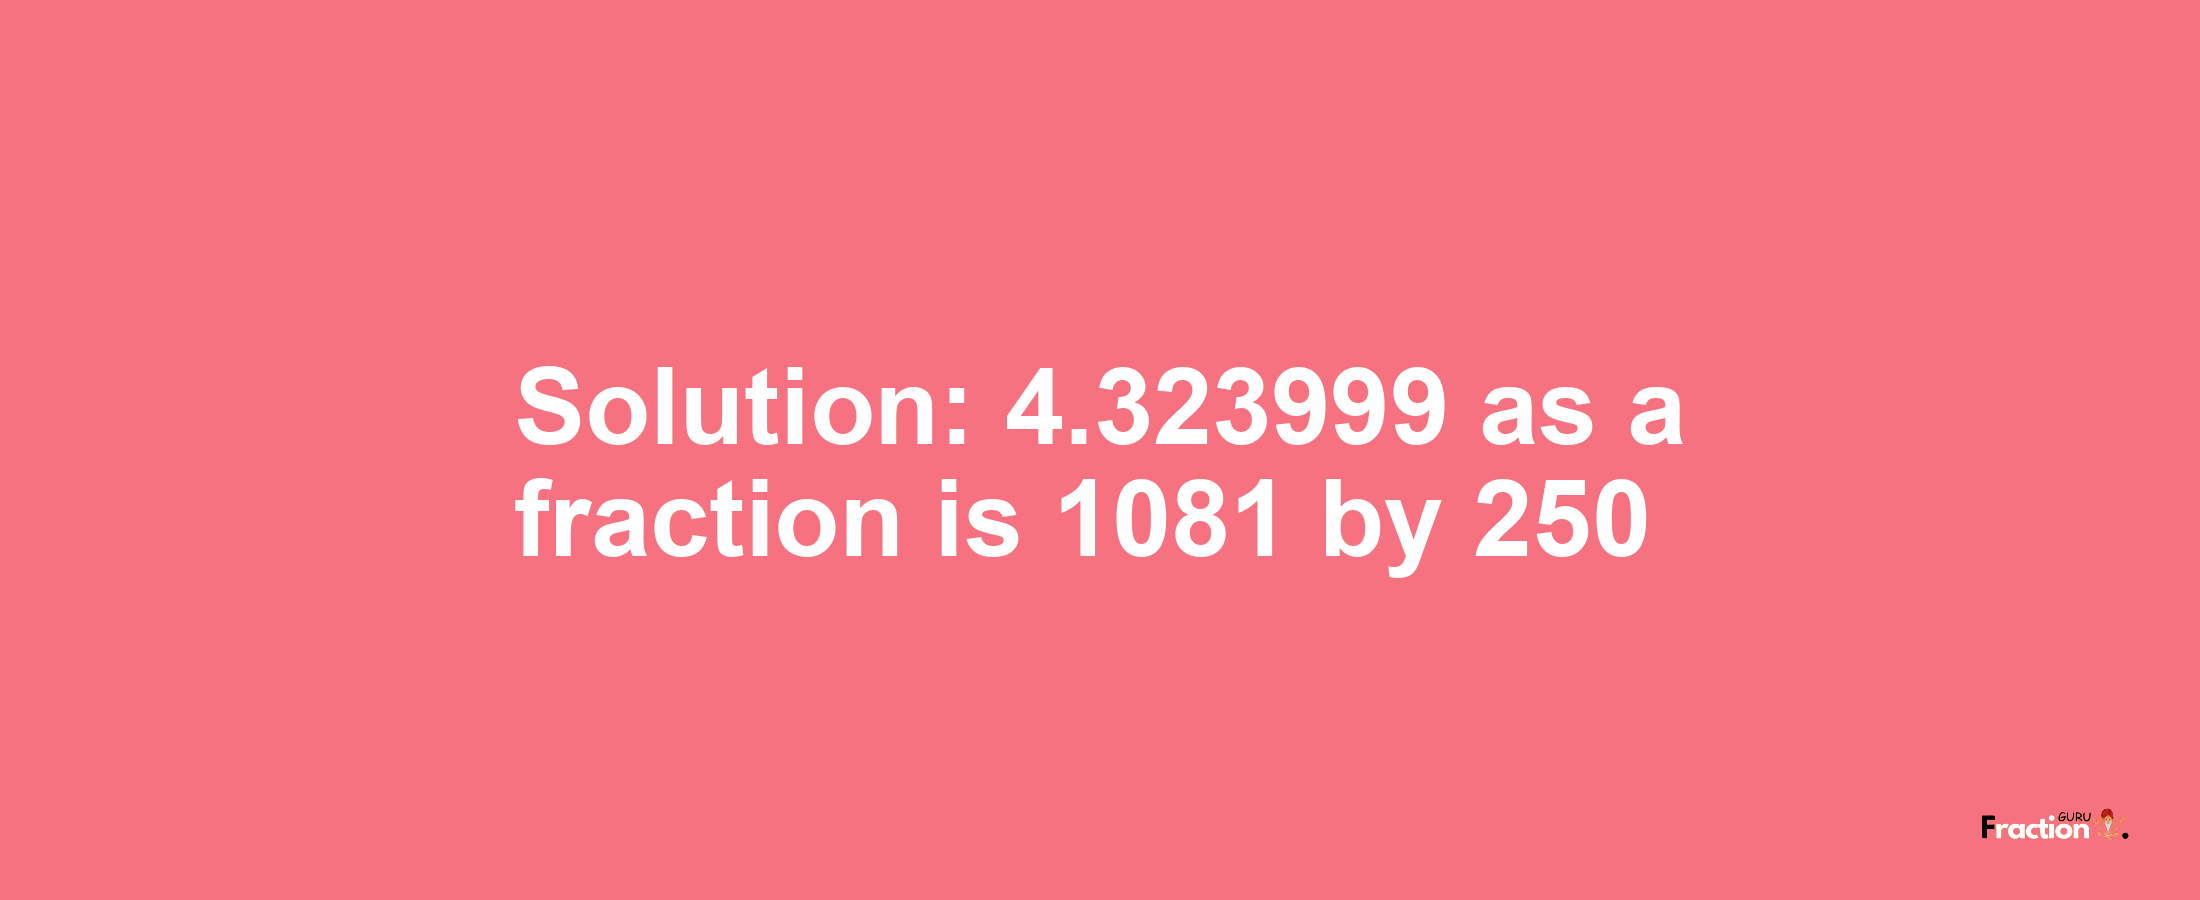 Solution:4.323999 as a fraction is 1081/250